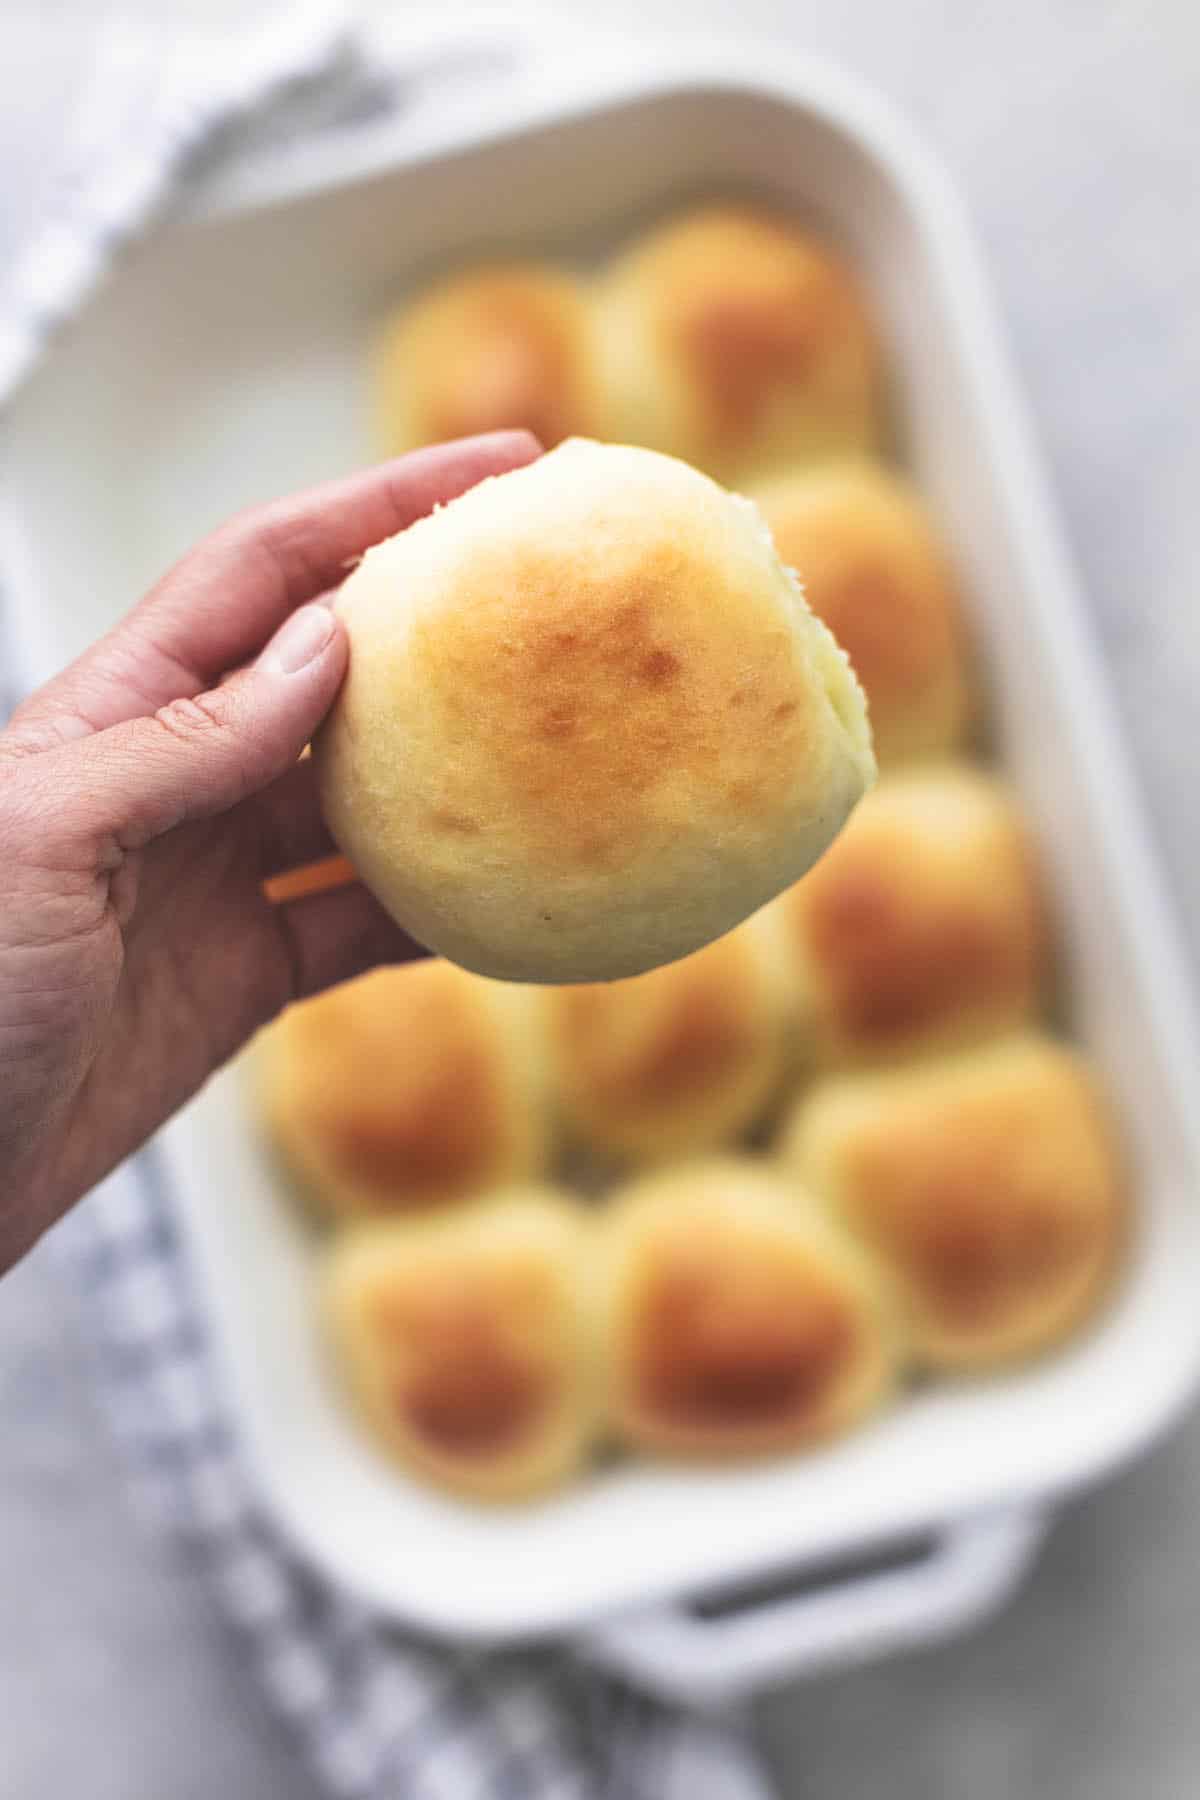 top view of a hand holding up a buttermilk dinner roll above more rolls in a baking pan.